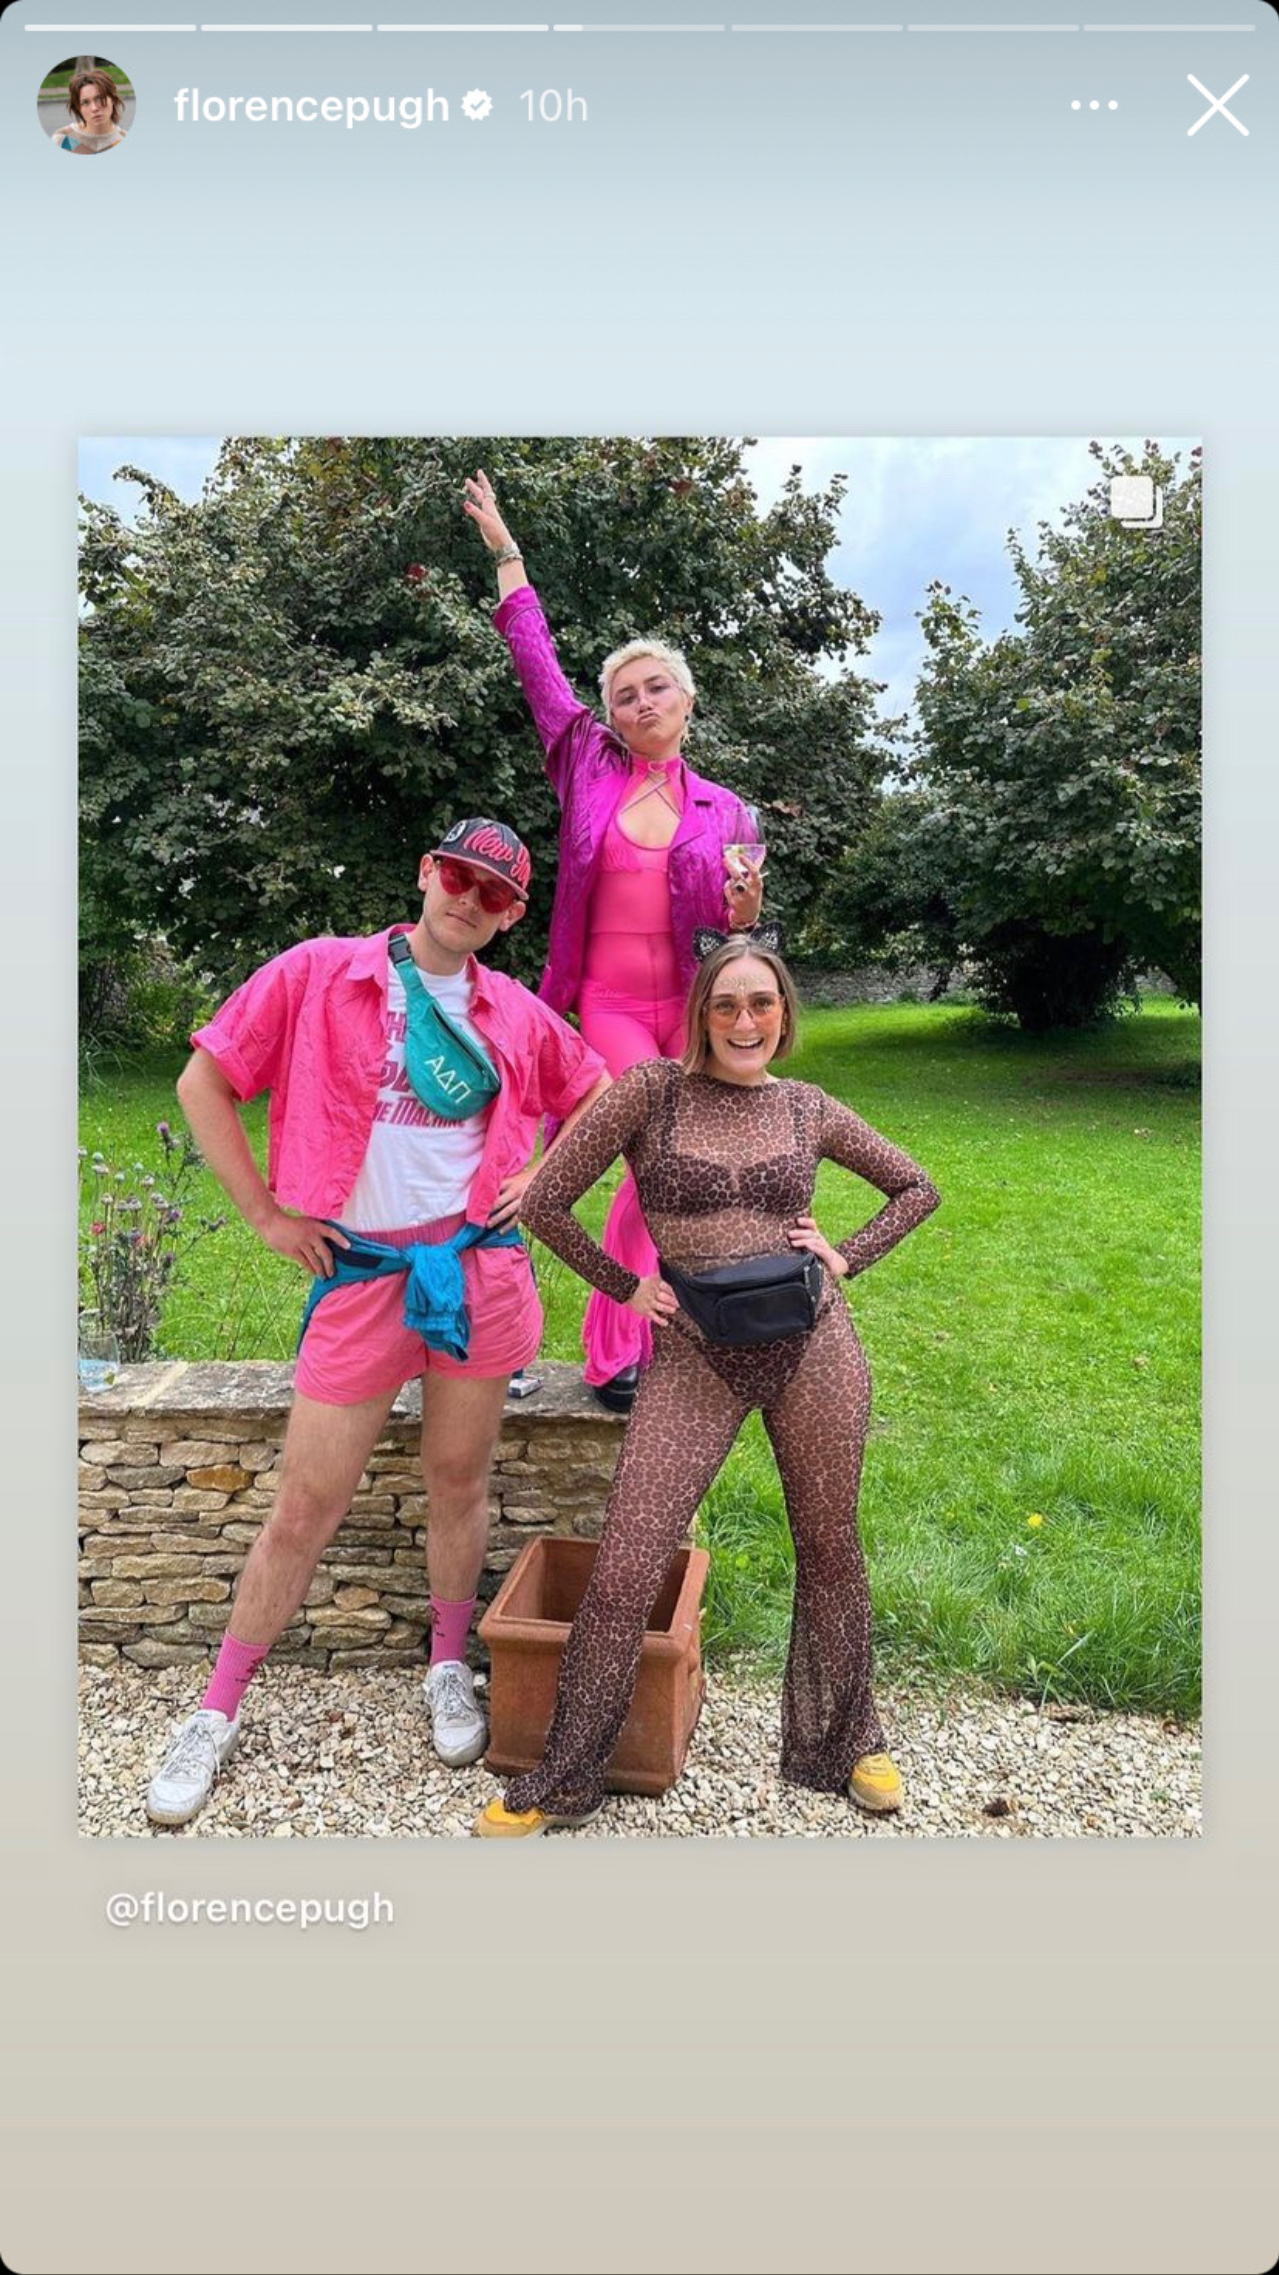 Florence Pugh wearing Barbie pink at a Music festival posing with friends.